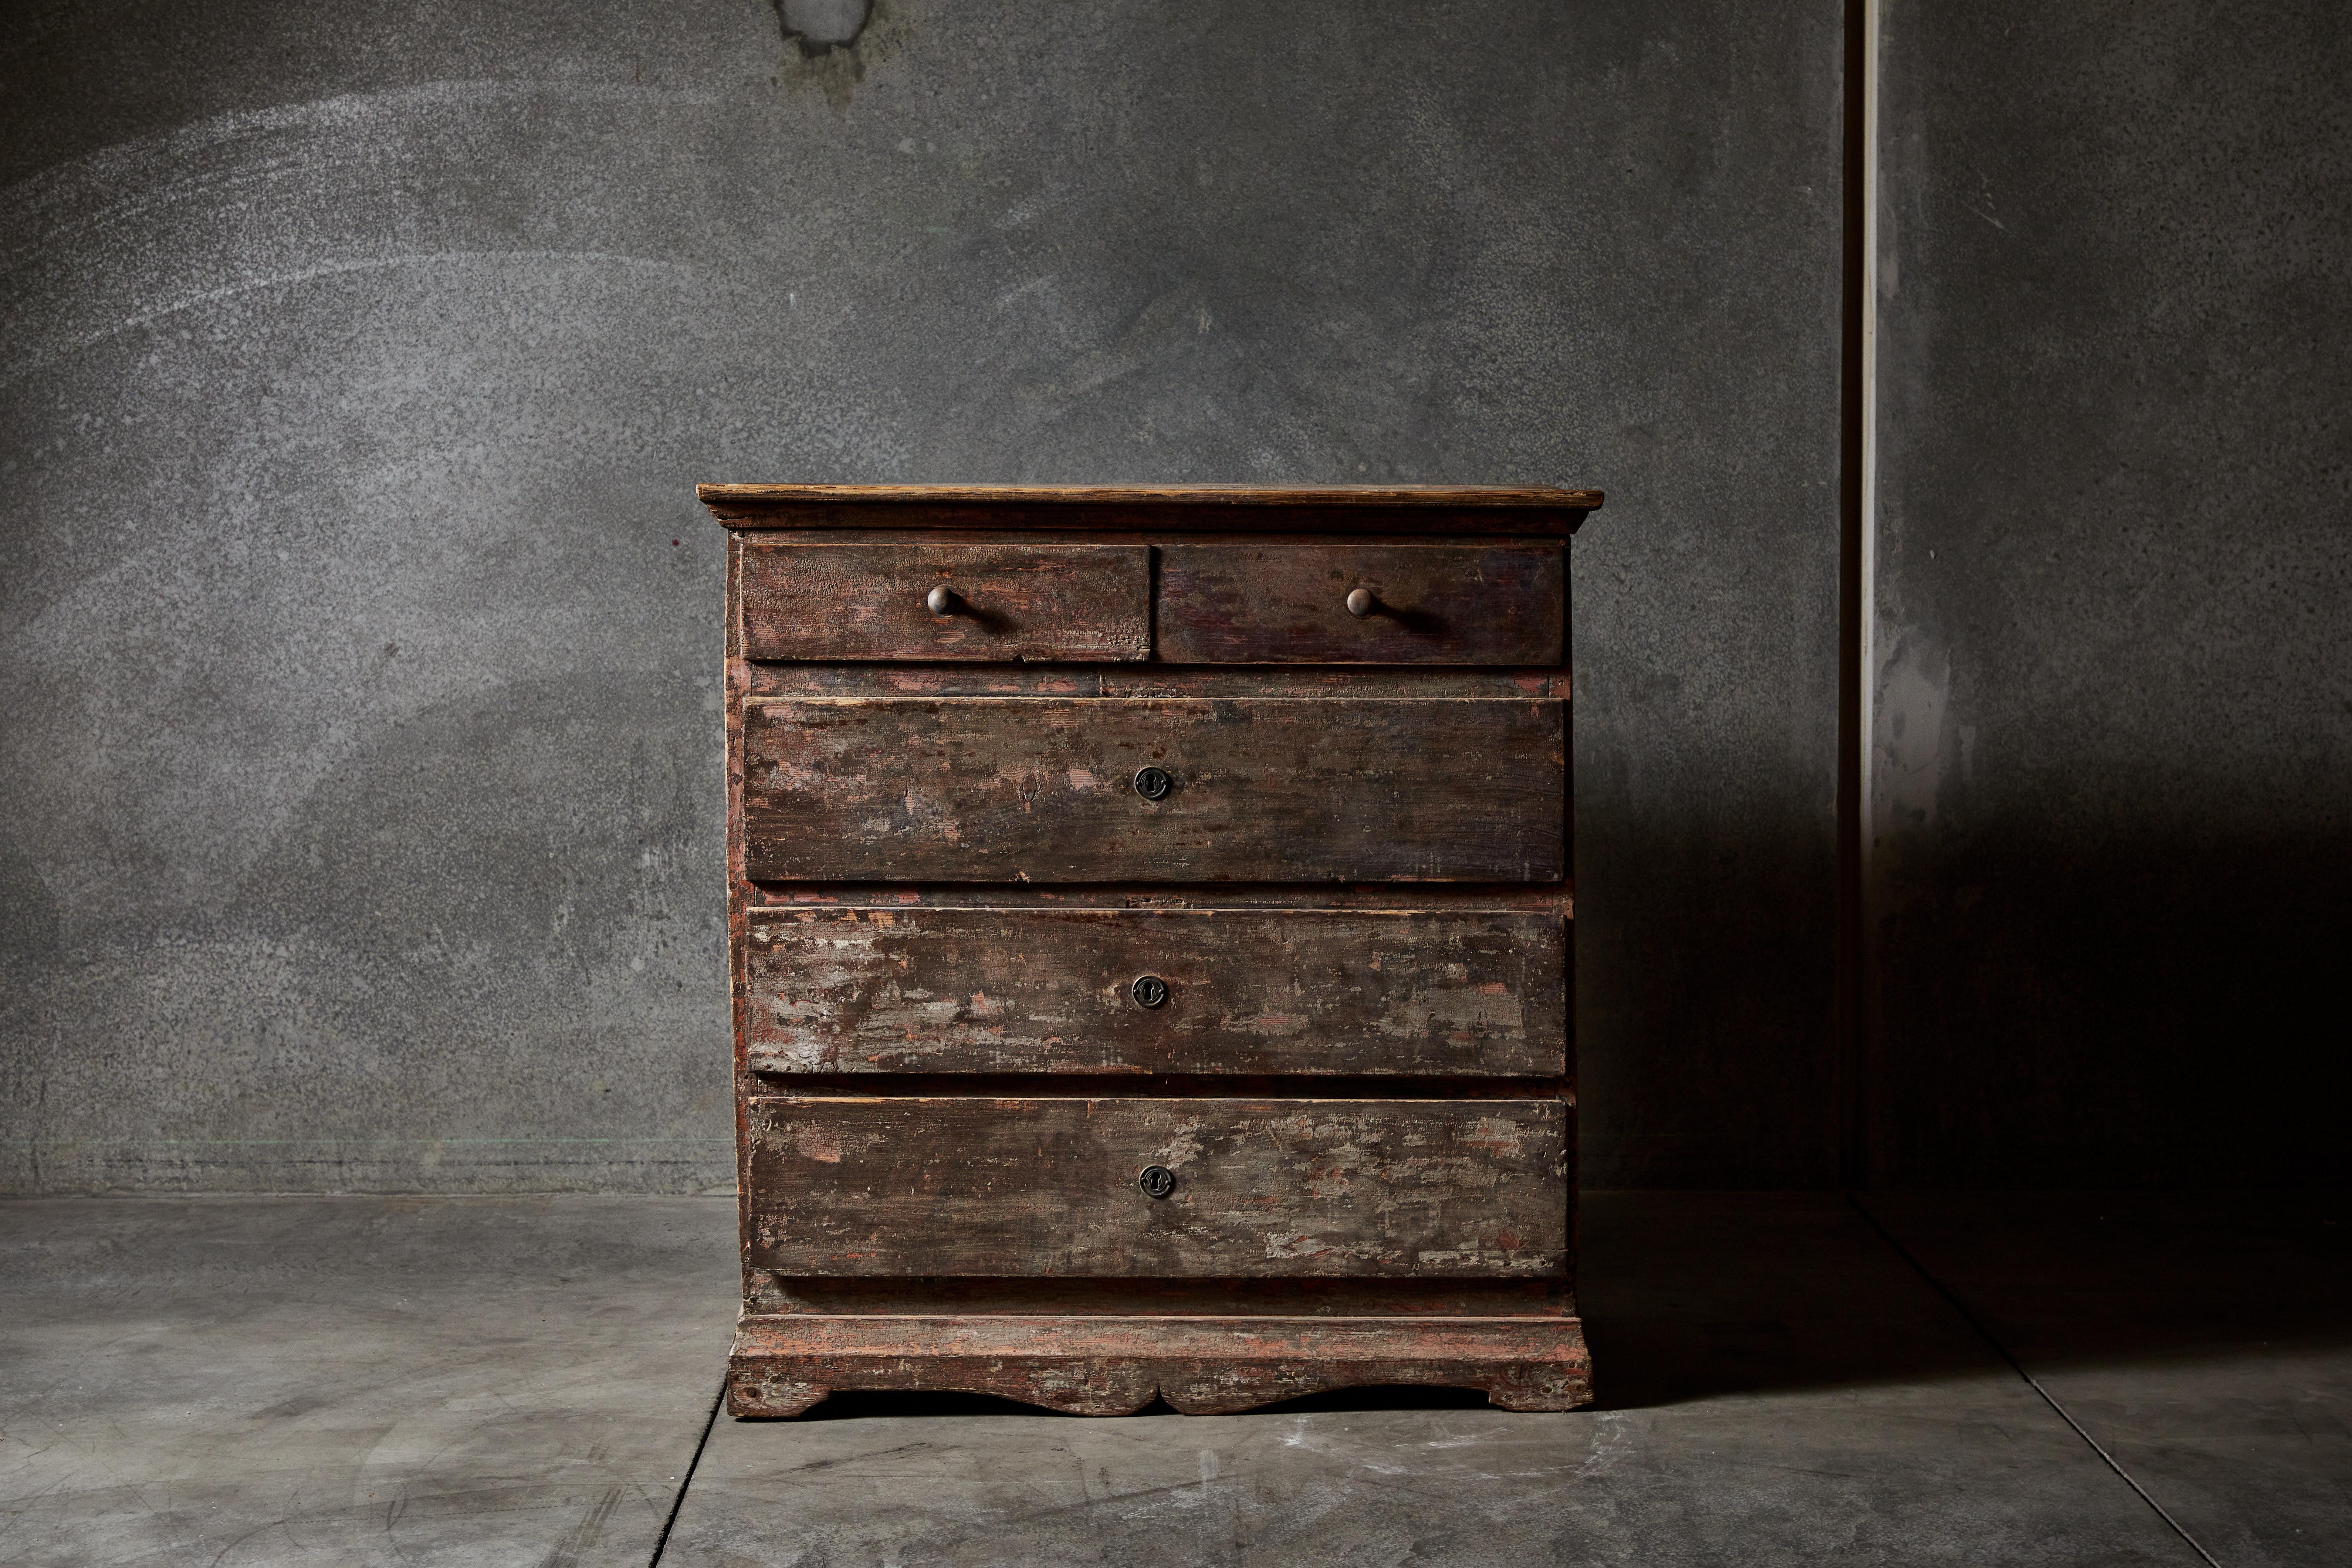 Painted rustic Swedish chest of drawers. Made in Sweden circa late 18th century.